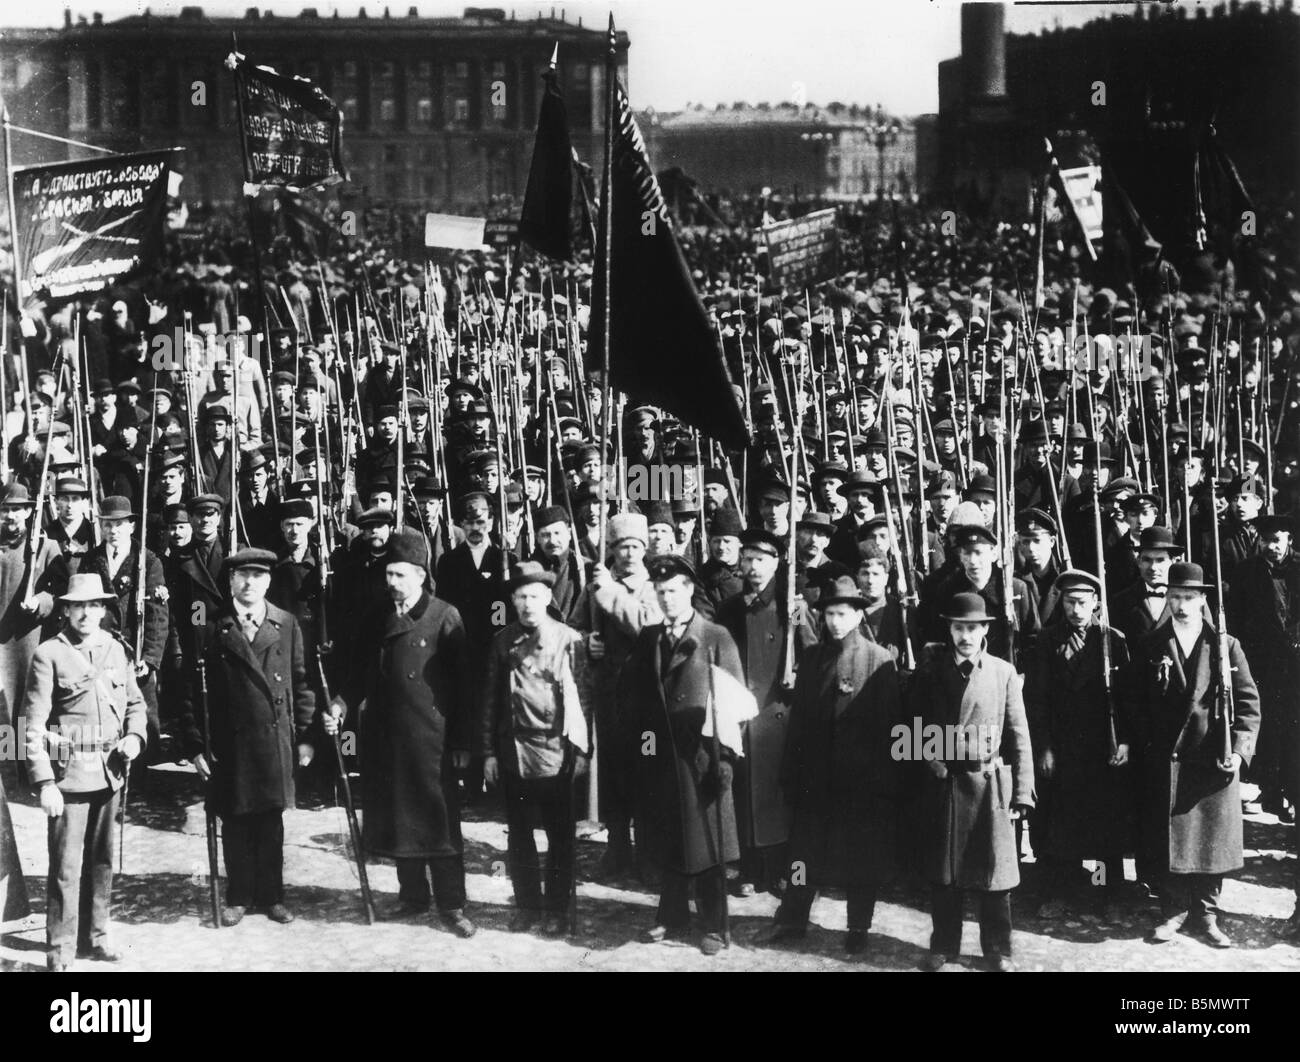 9RD 1917 5 1 A1 May Day Petrograd 1917 Russian Revolution May Day 1917 Armed Workers in Palace Square Petro grad Photograph Stock Photo